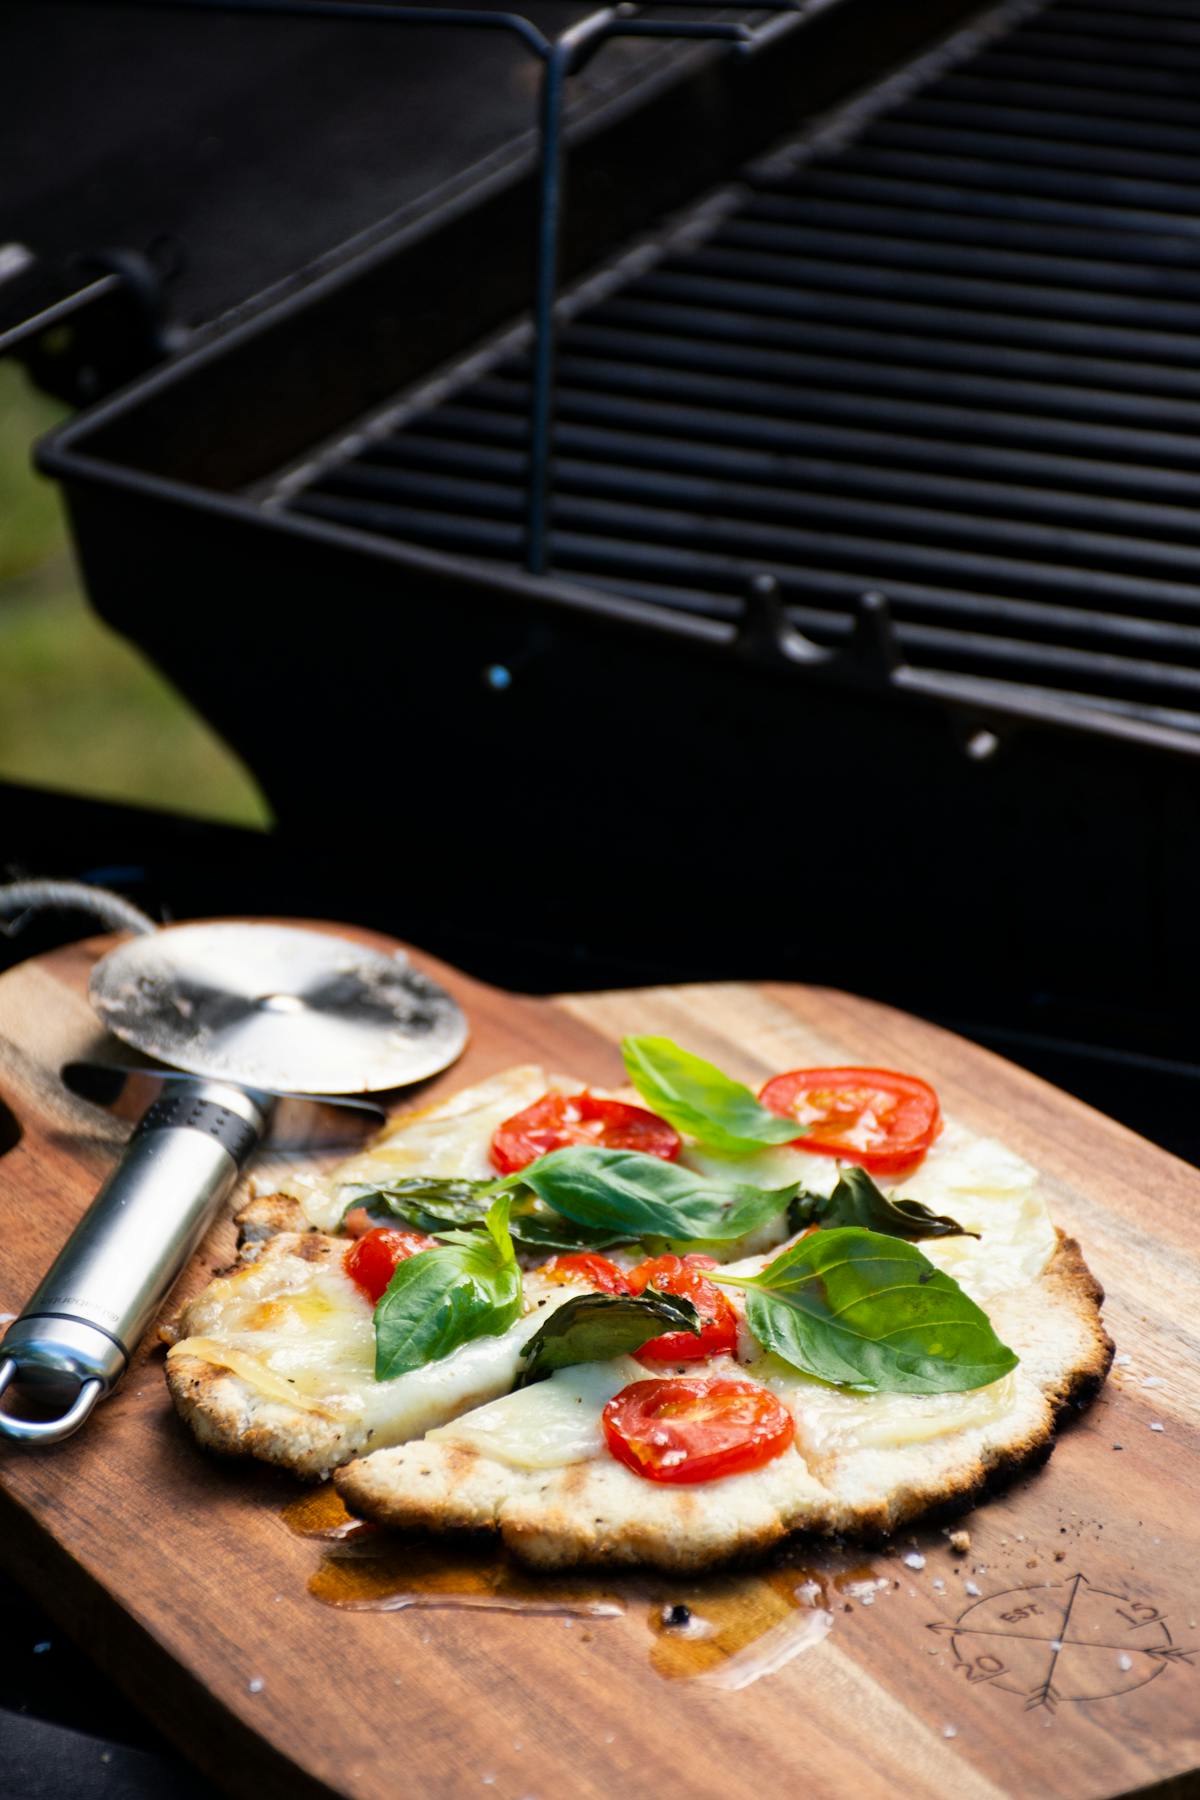 Grilled flatbread pizzas